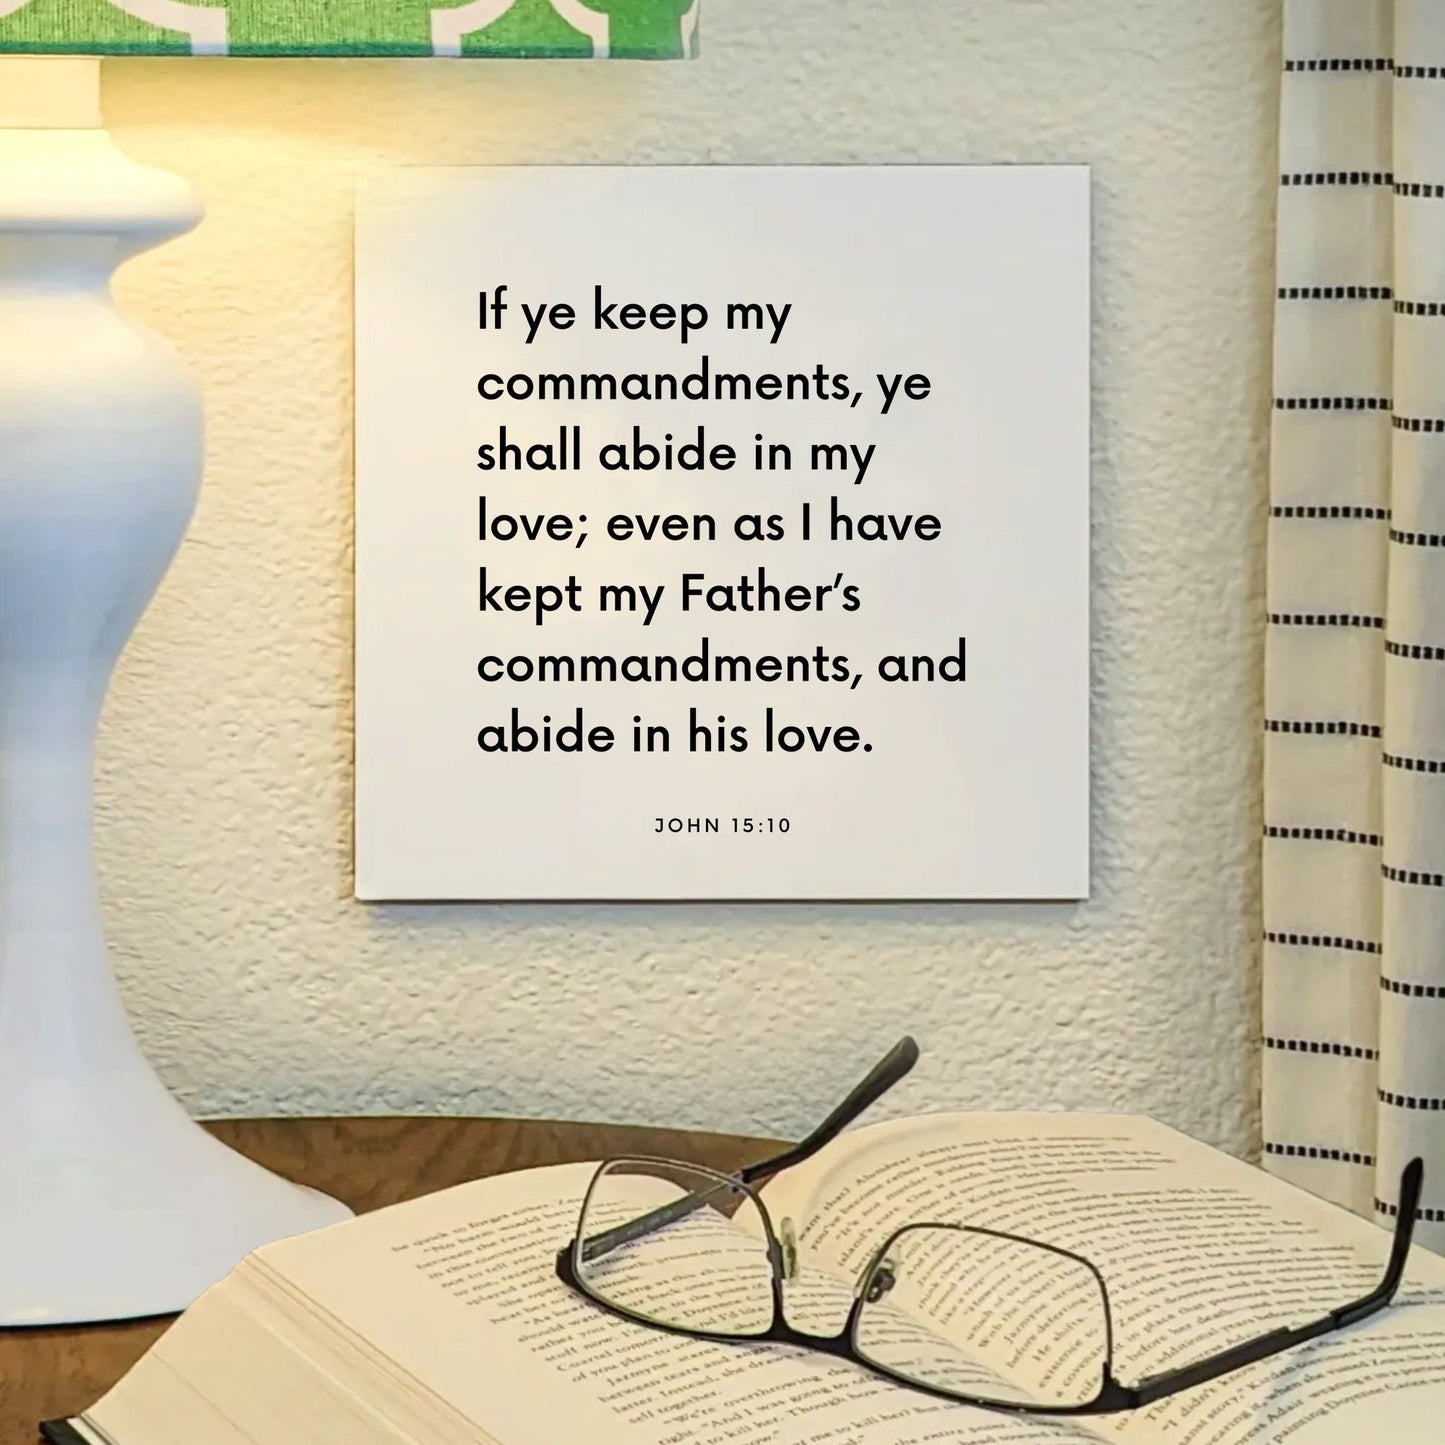 Lamp mouting of the scripture tile for John 15:10 - "If ye keep my commandments, ye shall abide in my love"